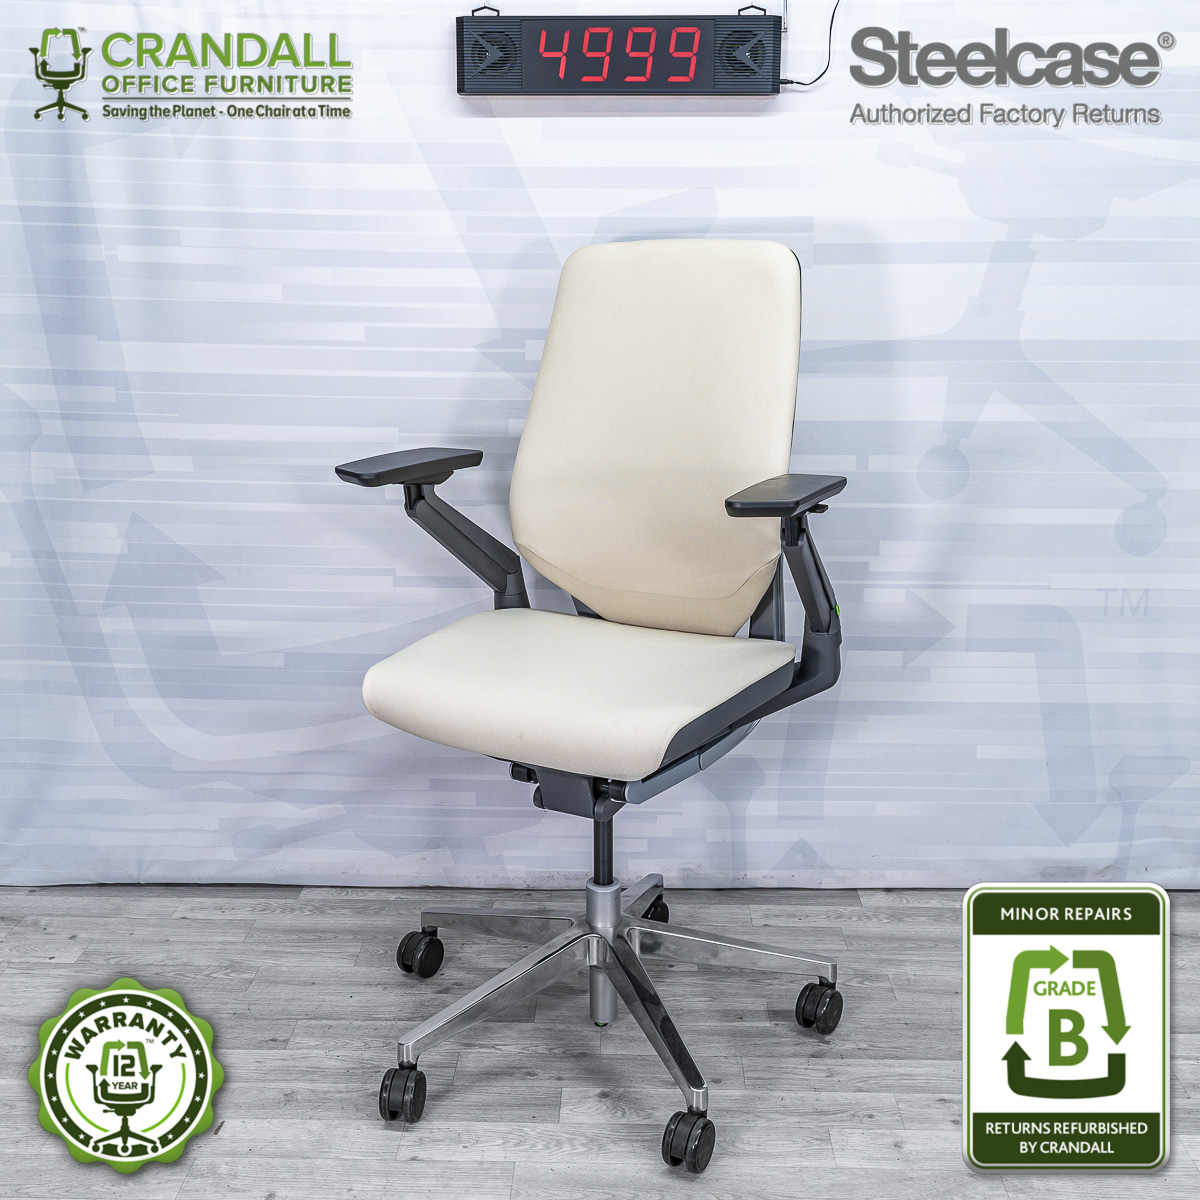 Remanufactured Steelcase 442 Gesture Office Chair - Shell Back - Crandall  Office Furniture